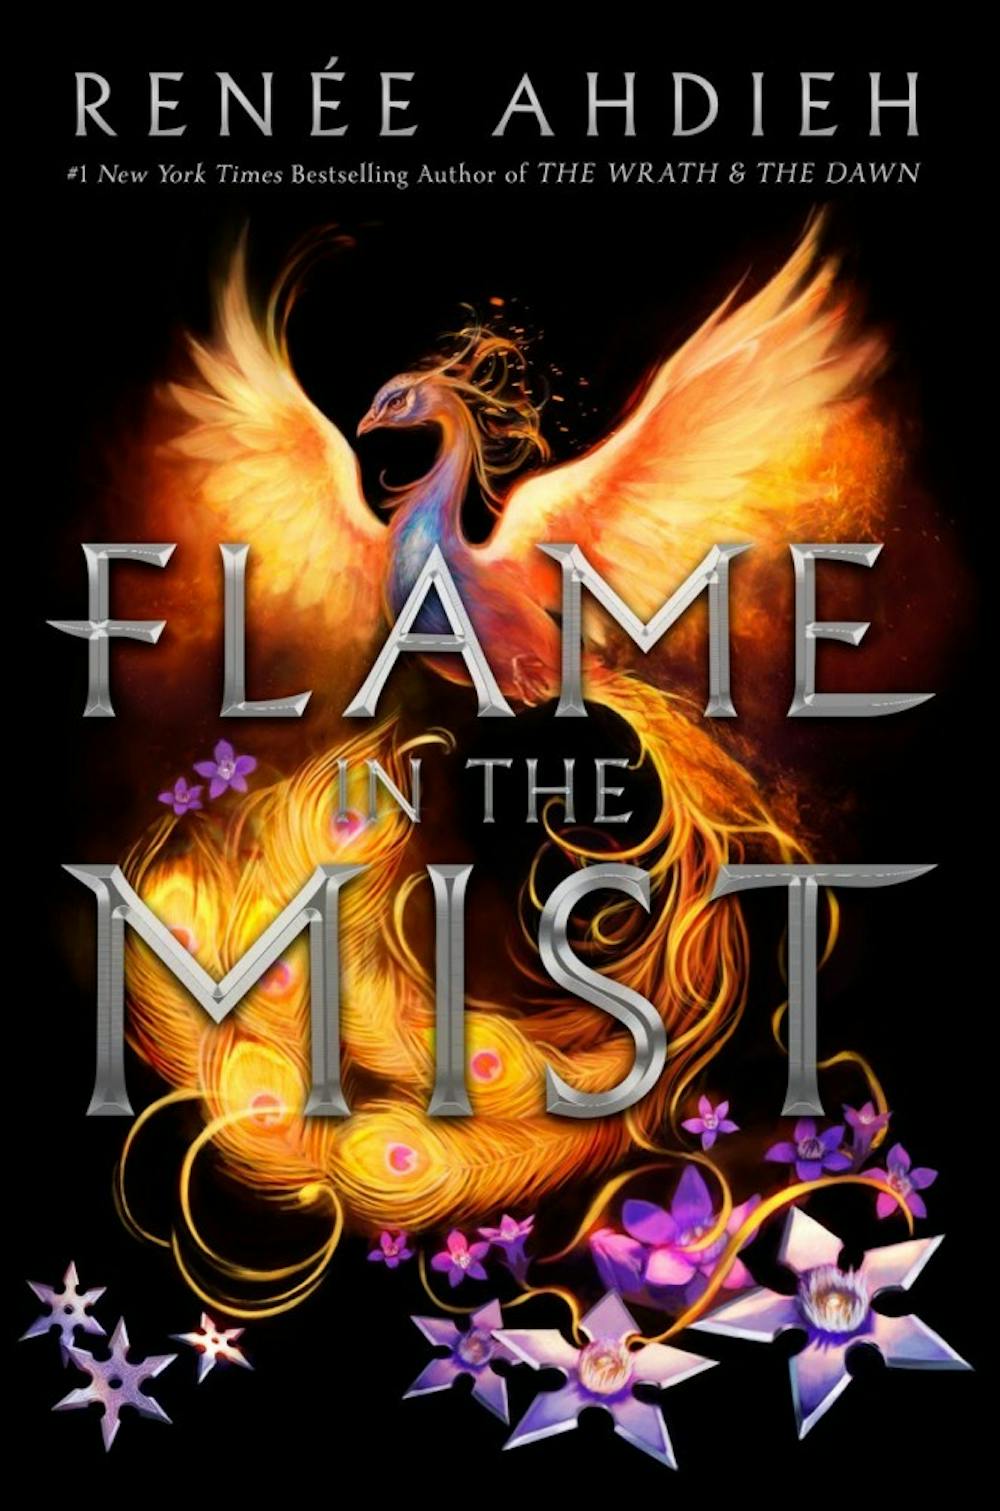 Renee Ahdieh's "Flame in the Mist" follows the daughter of a samurai in feudal Japan. 
